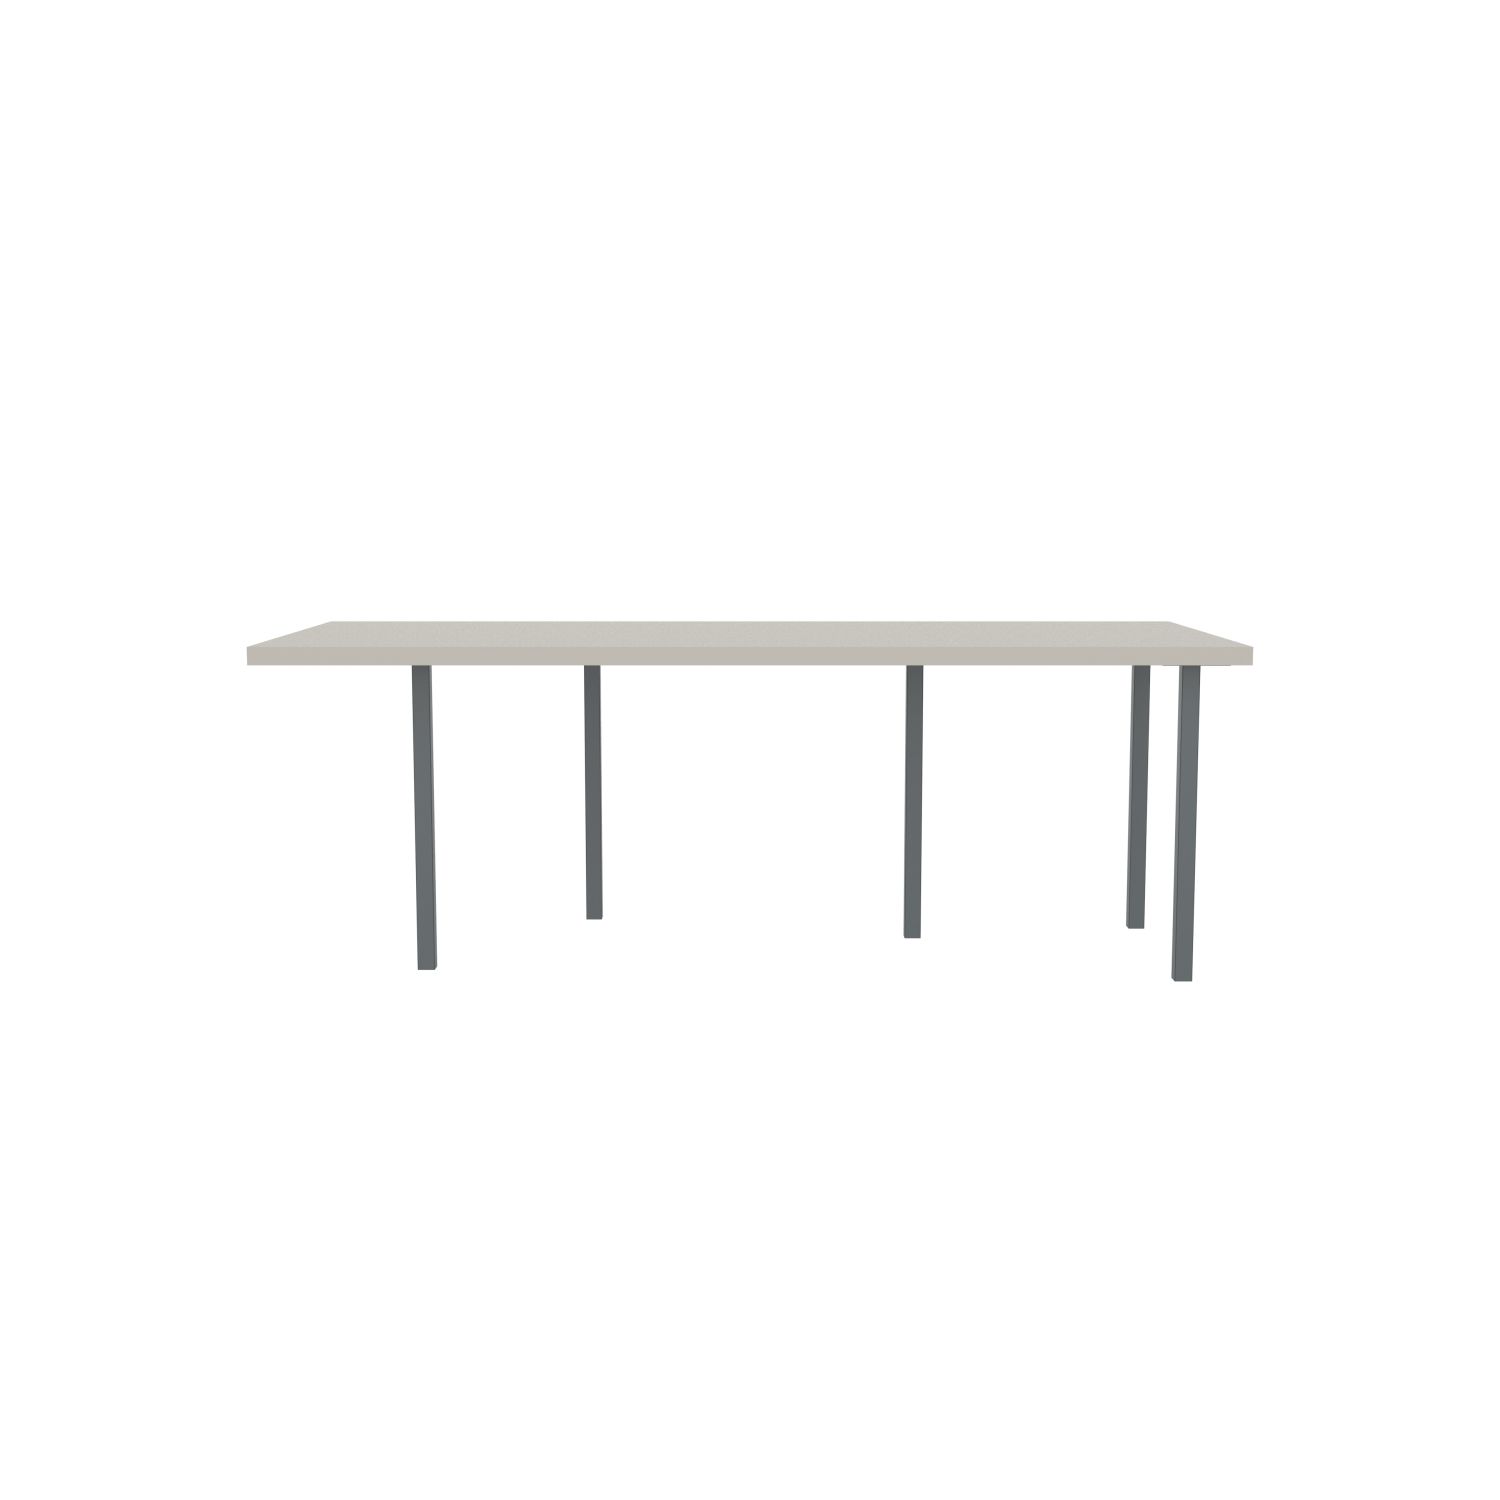 lensvelt bbrand table five fixed heigt 915x218 hpl white 50 mm price level 1 dark grey ral7011